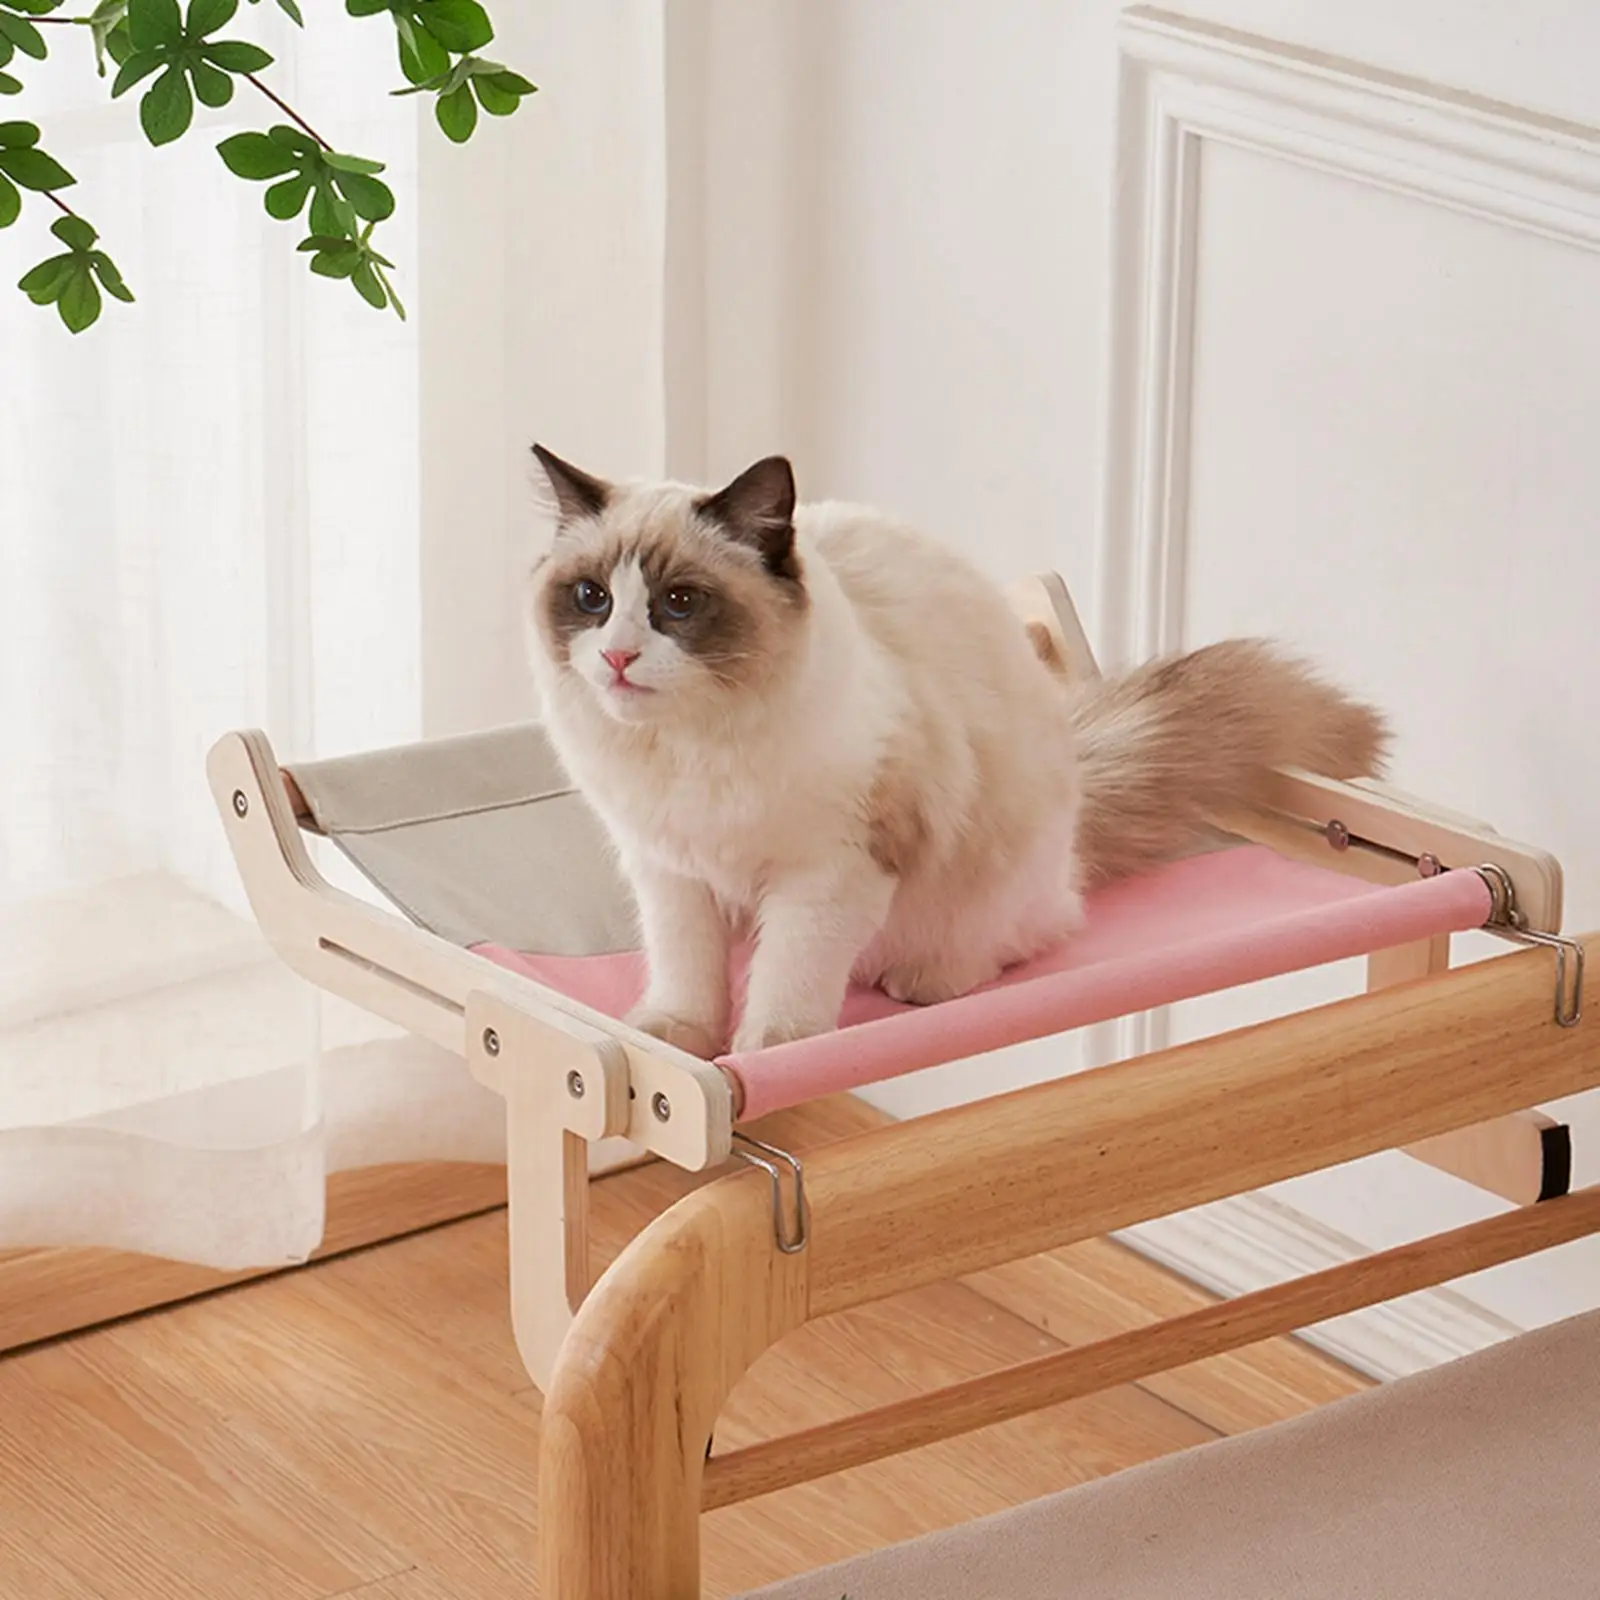 Cat Window Perch Seat Shelf Hammock Durable for No Suction Cup No Drilling